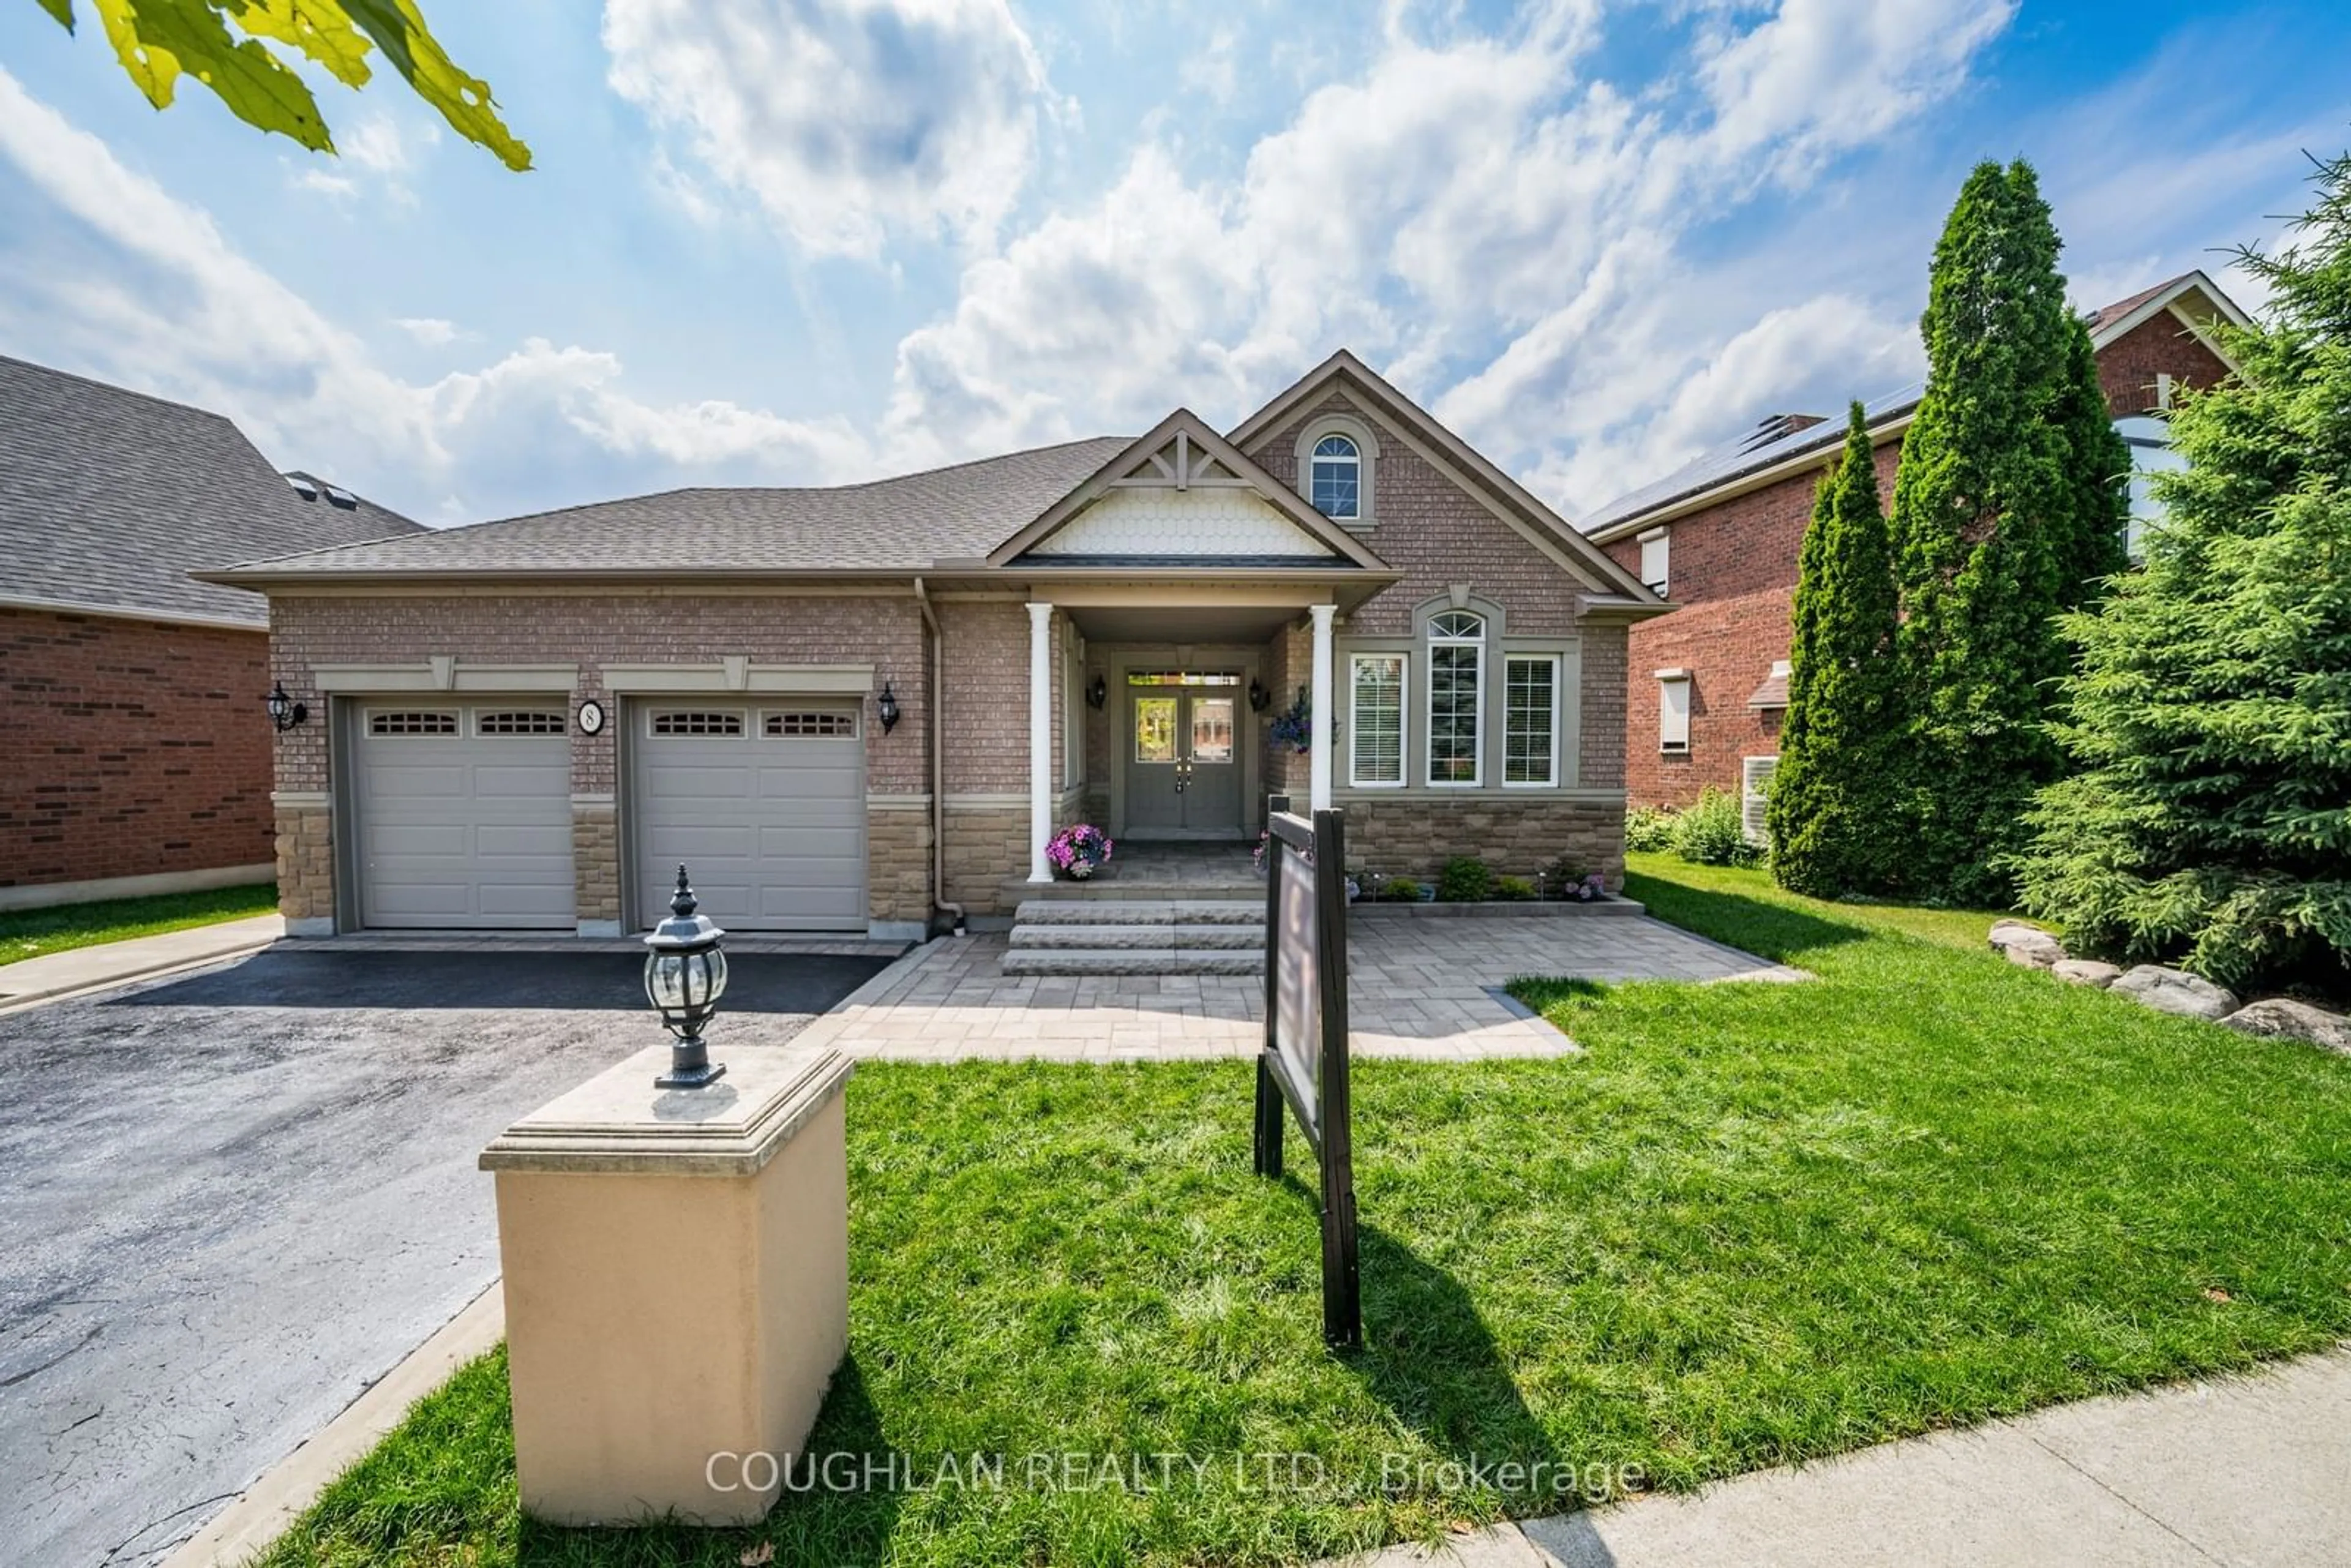 Home with brick exterior material for 8 Cottontail Ave, Markham Ontario L3S 4E7